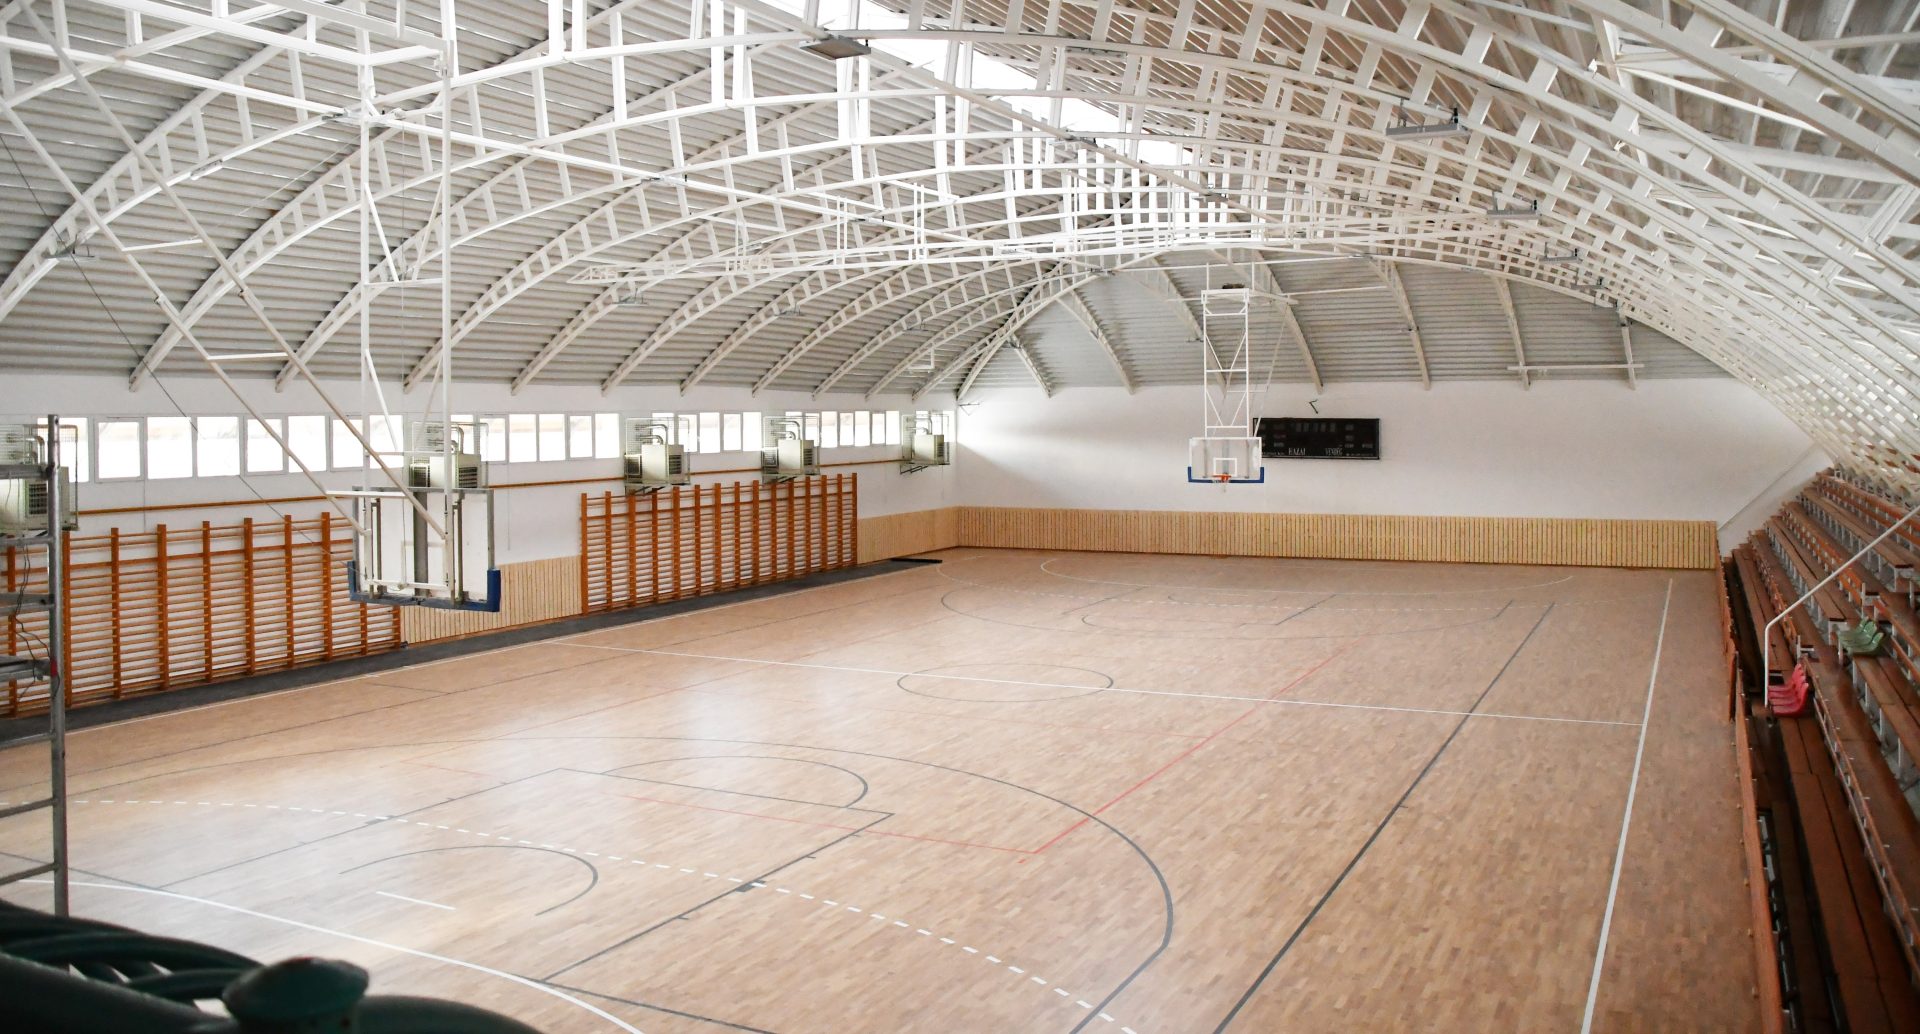 The sports hall of the high school in Piliscsaba has been modernized